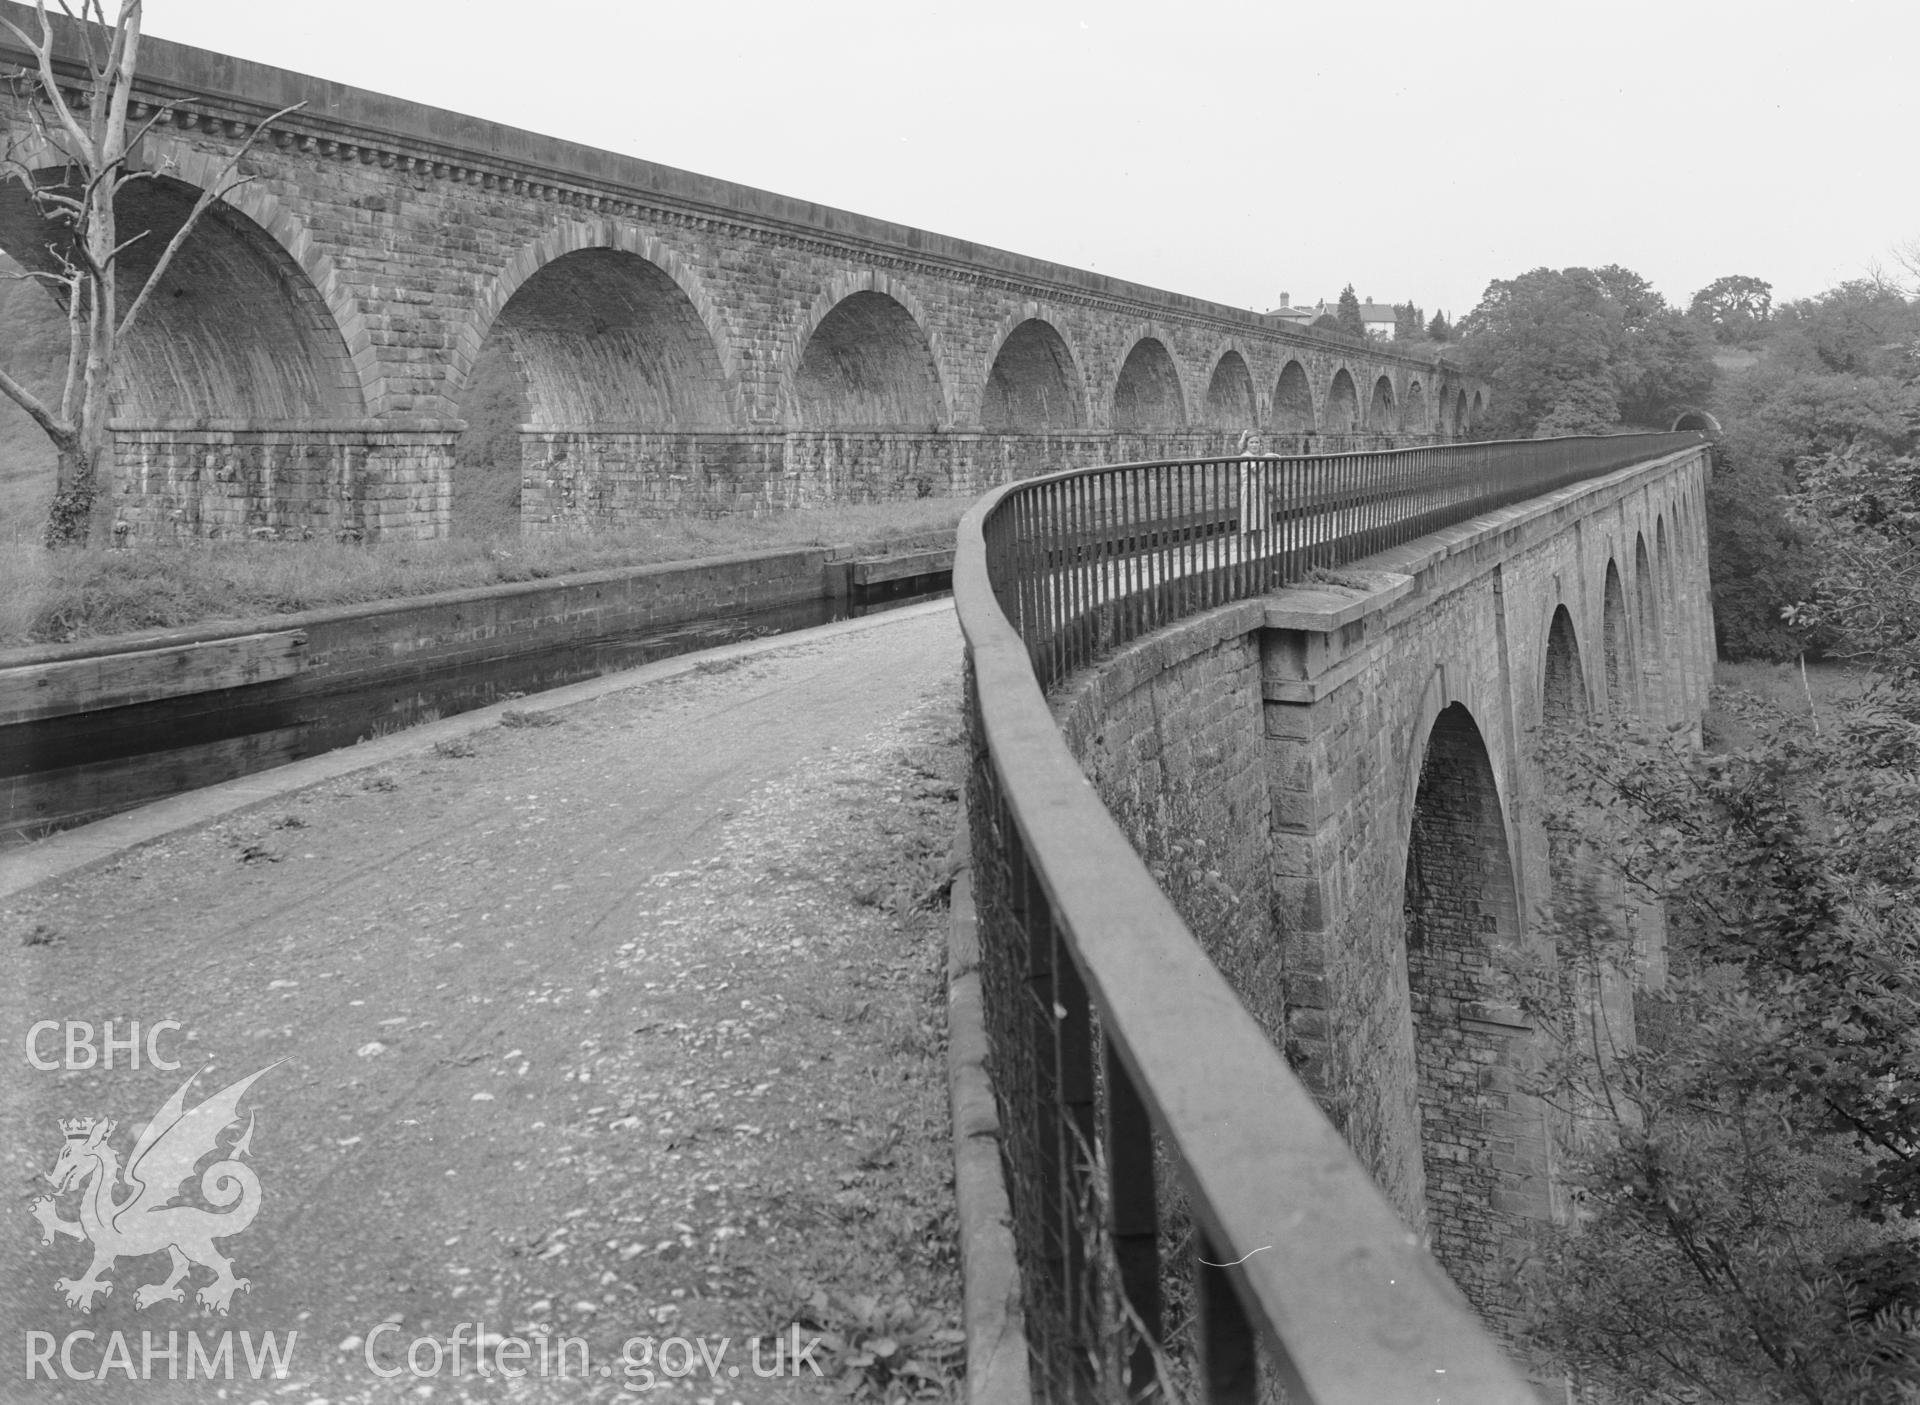 Black and white photograph showing Chirk Viaduct and Aqueduct (NPRN 34406), Denbighshire, looking from S